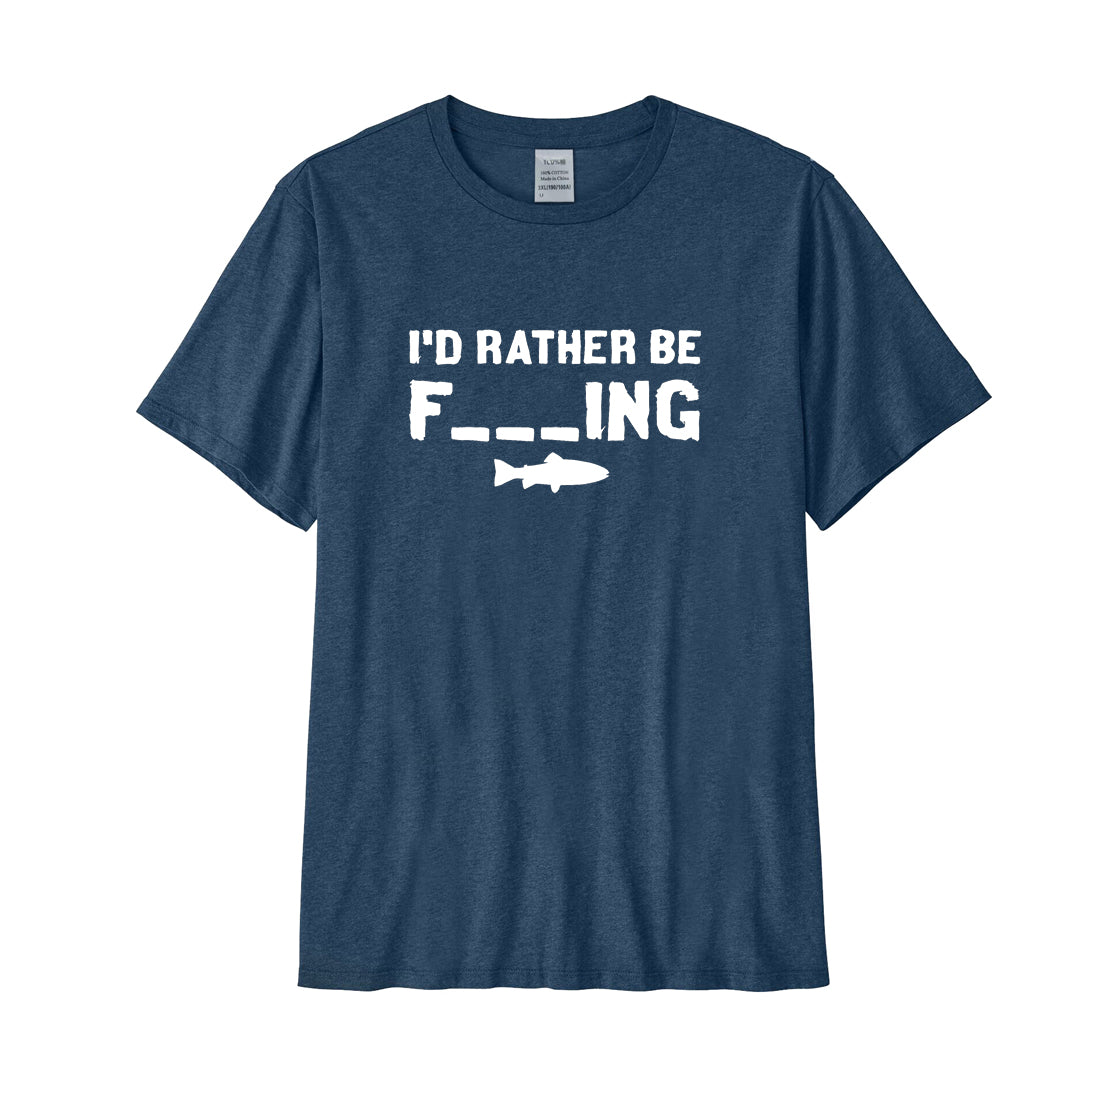 I'D RATHER BE F_ING Performance T-Shirt